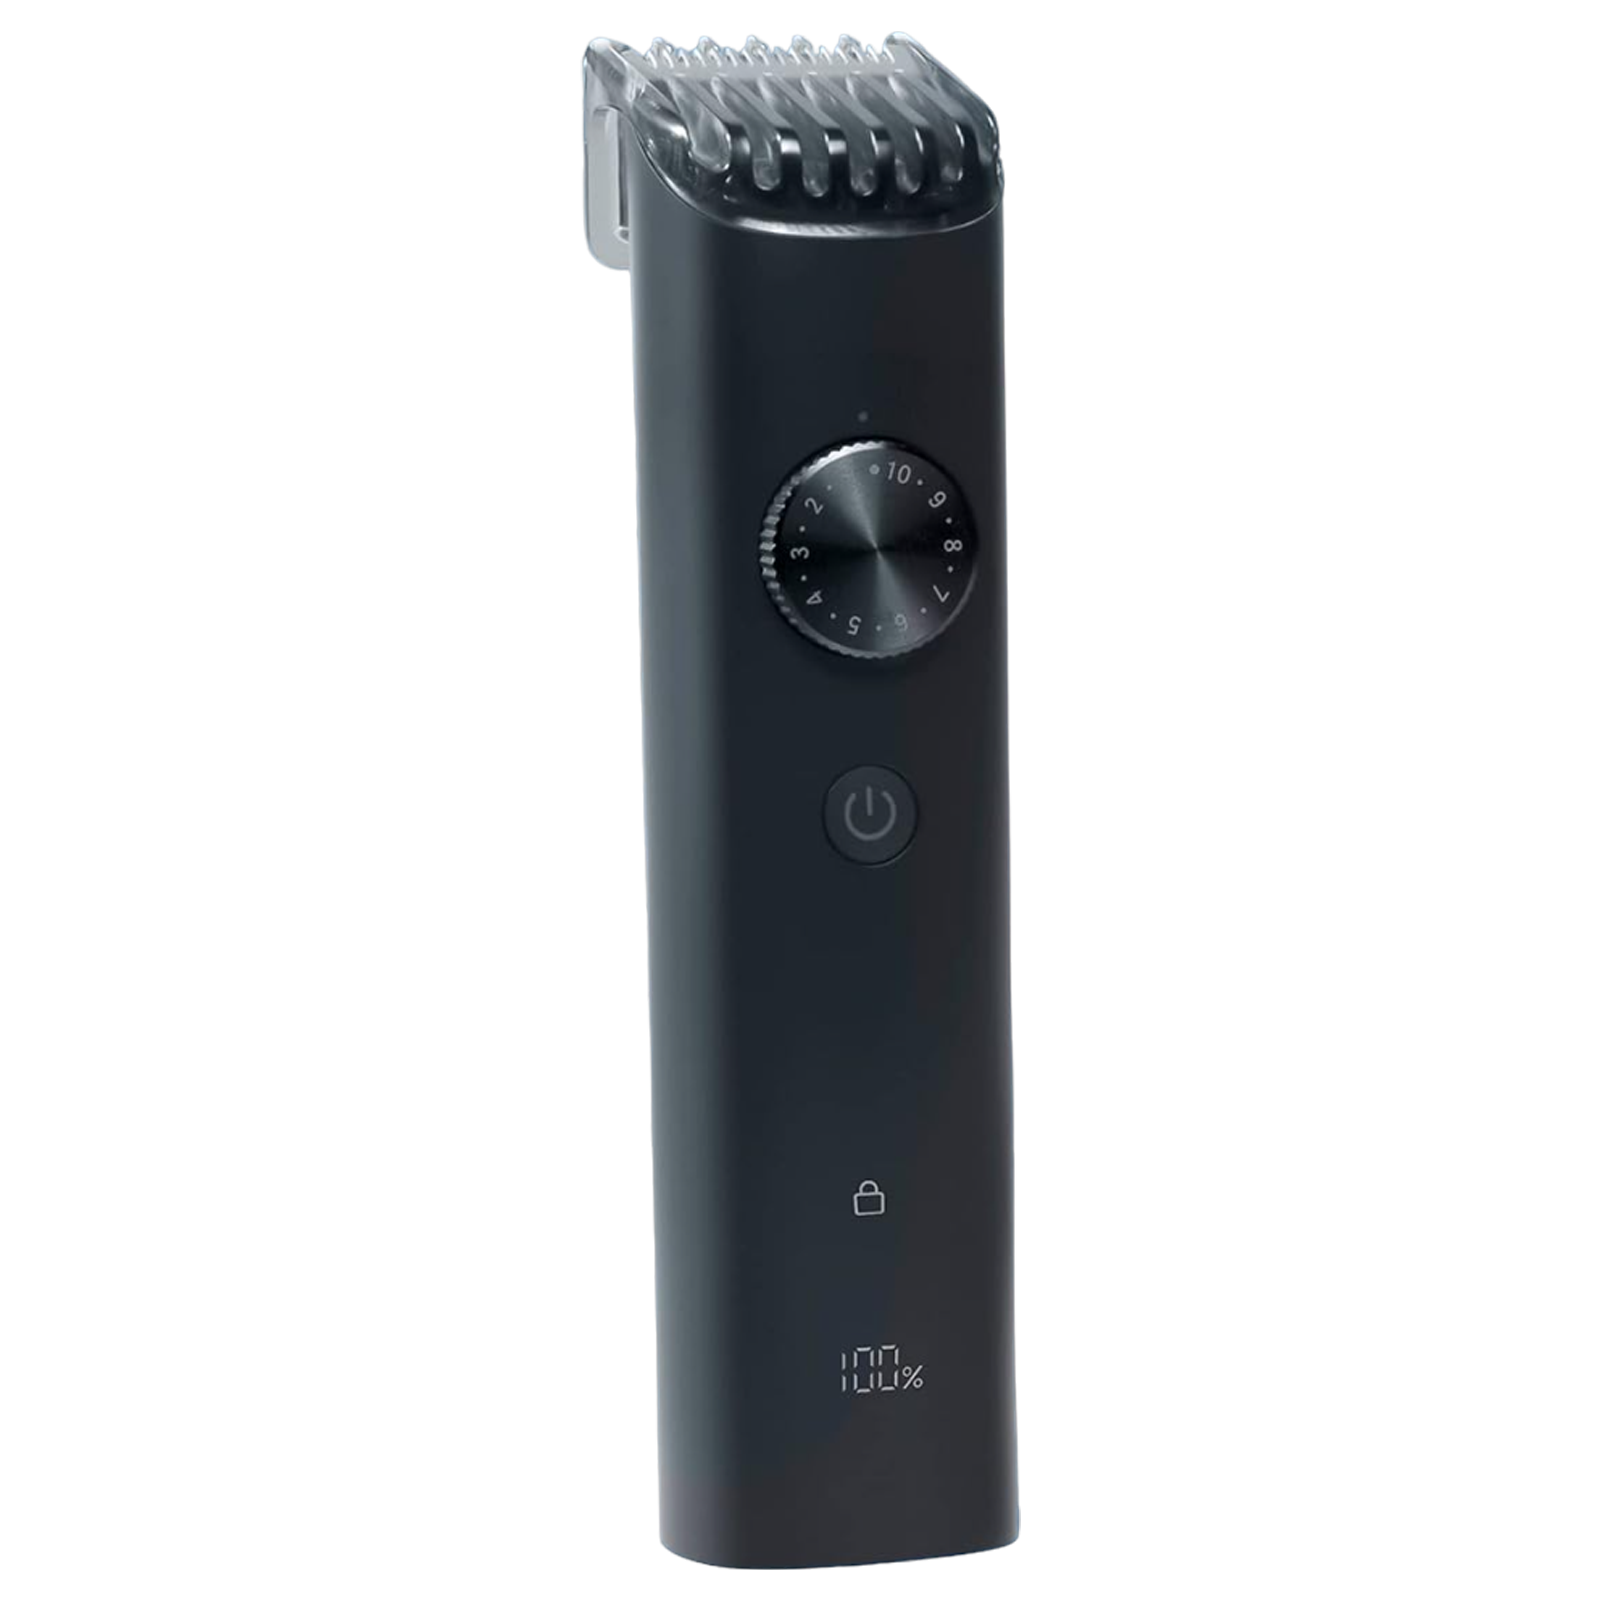 Xiaomi Trimmer 2 Rechargeable Corded & Cordless Dry Trimmer for Beard & Moustache with 40 Length Settings for Men (90mins Runtime, IPX7 Waterproof, Bl...